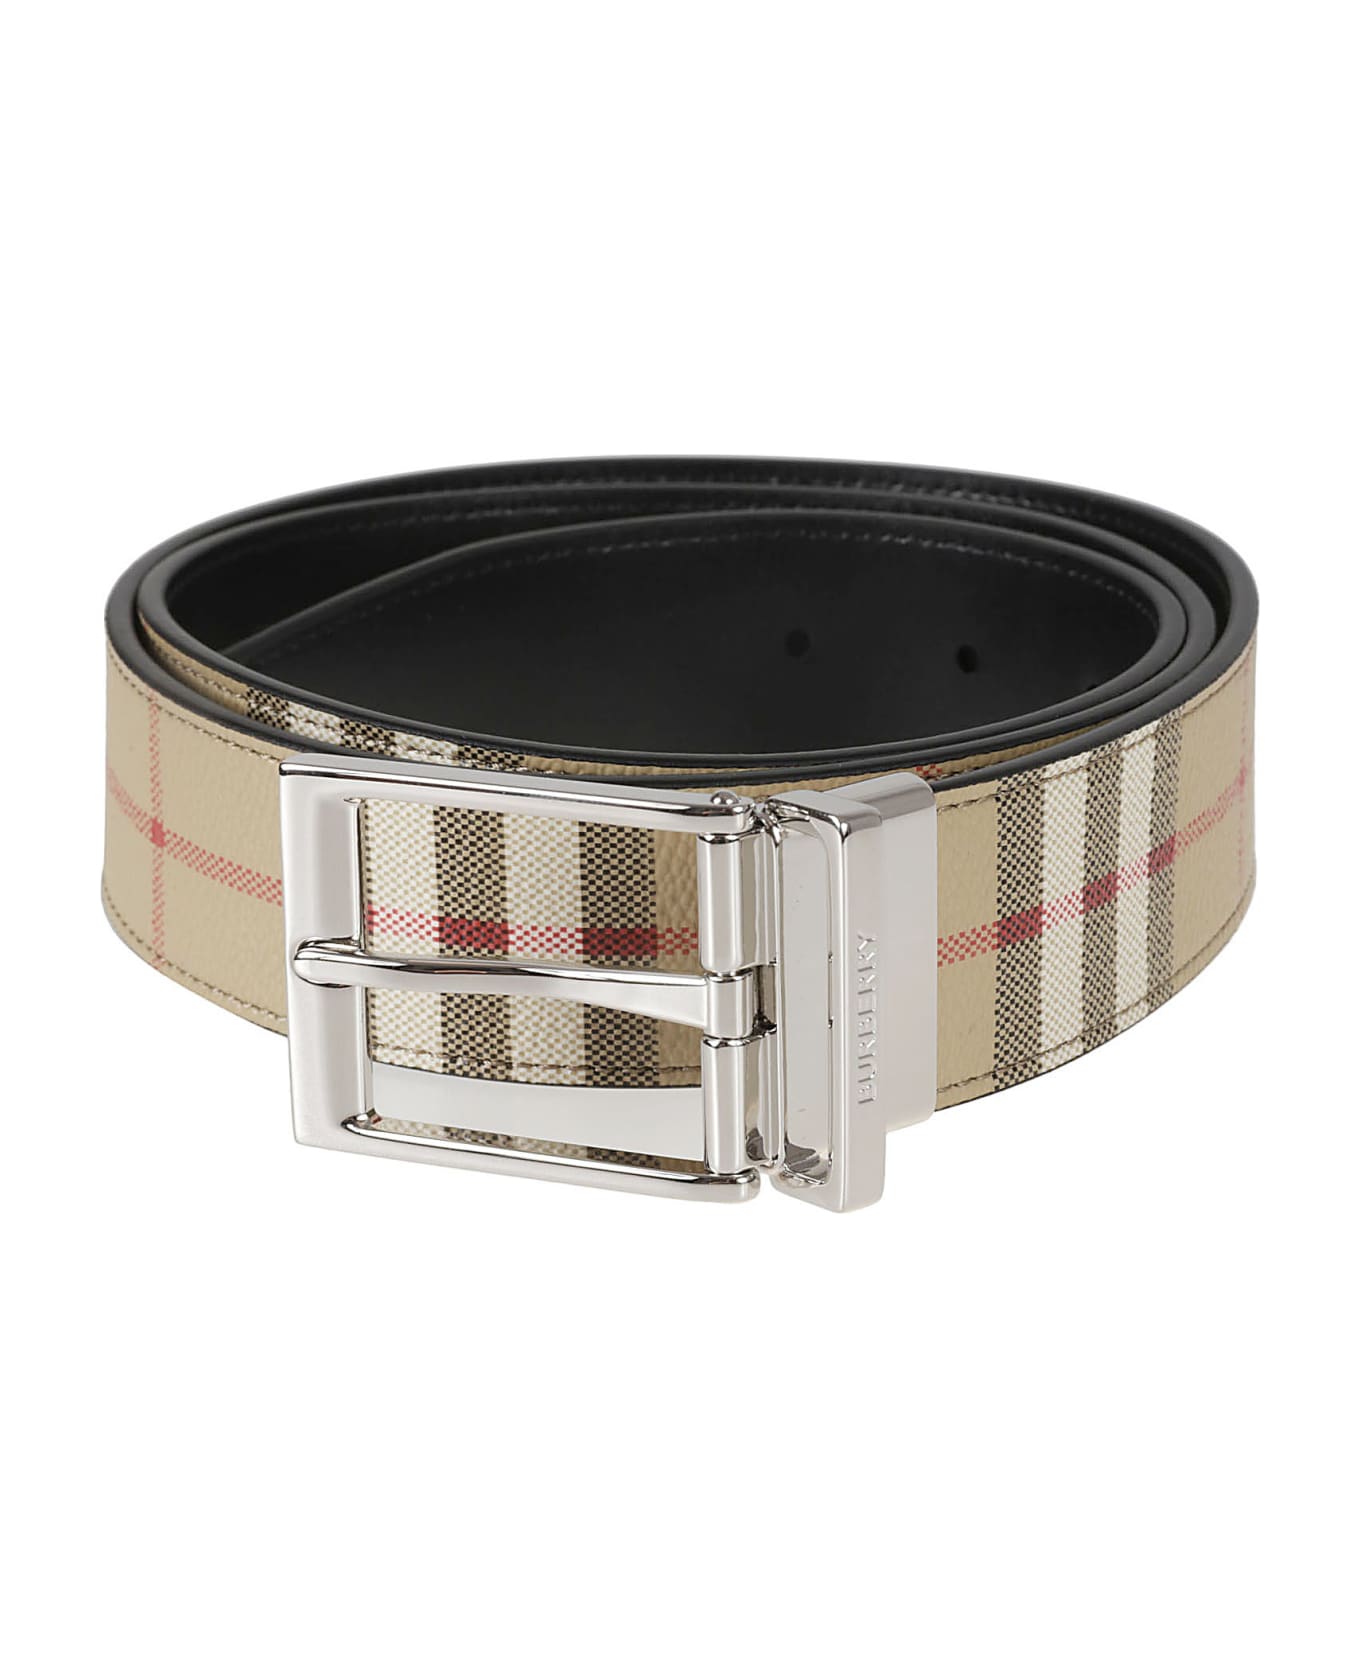 Burberry Classic Checked Belt - BEIGE